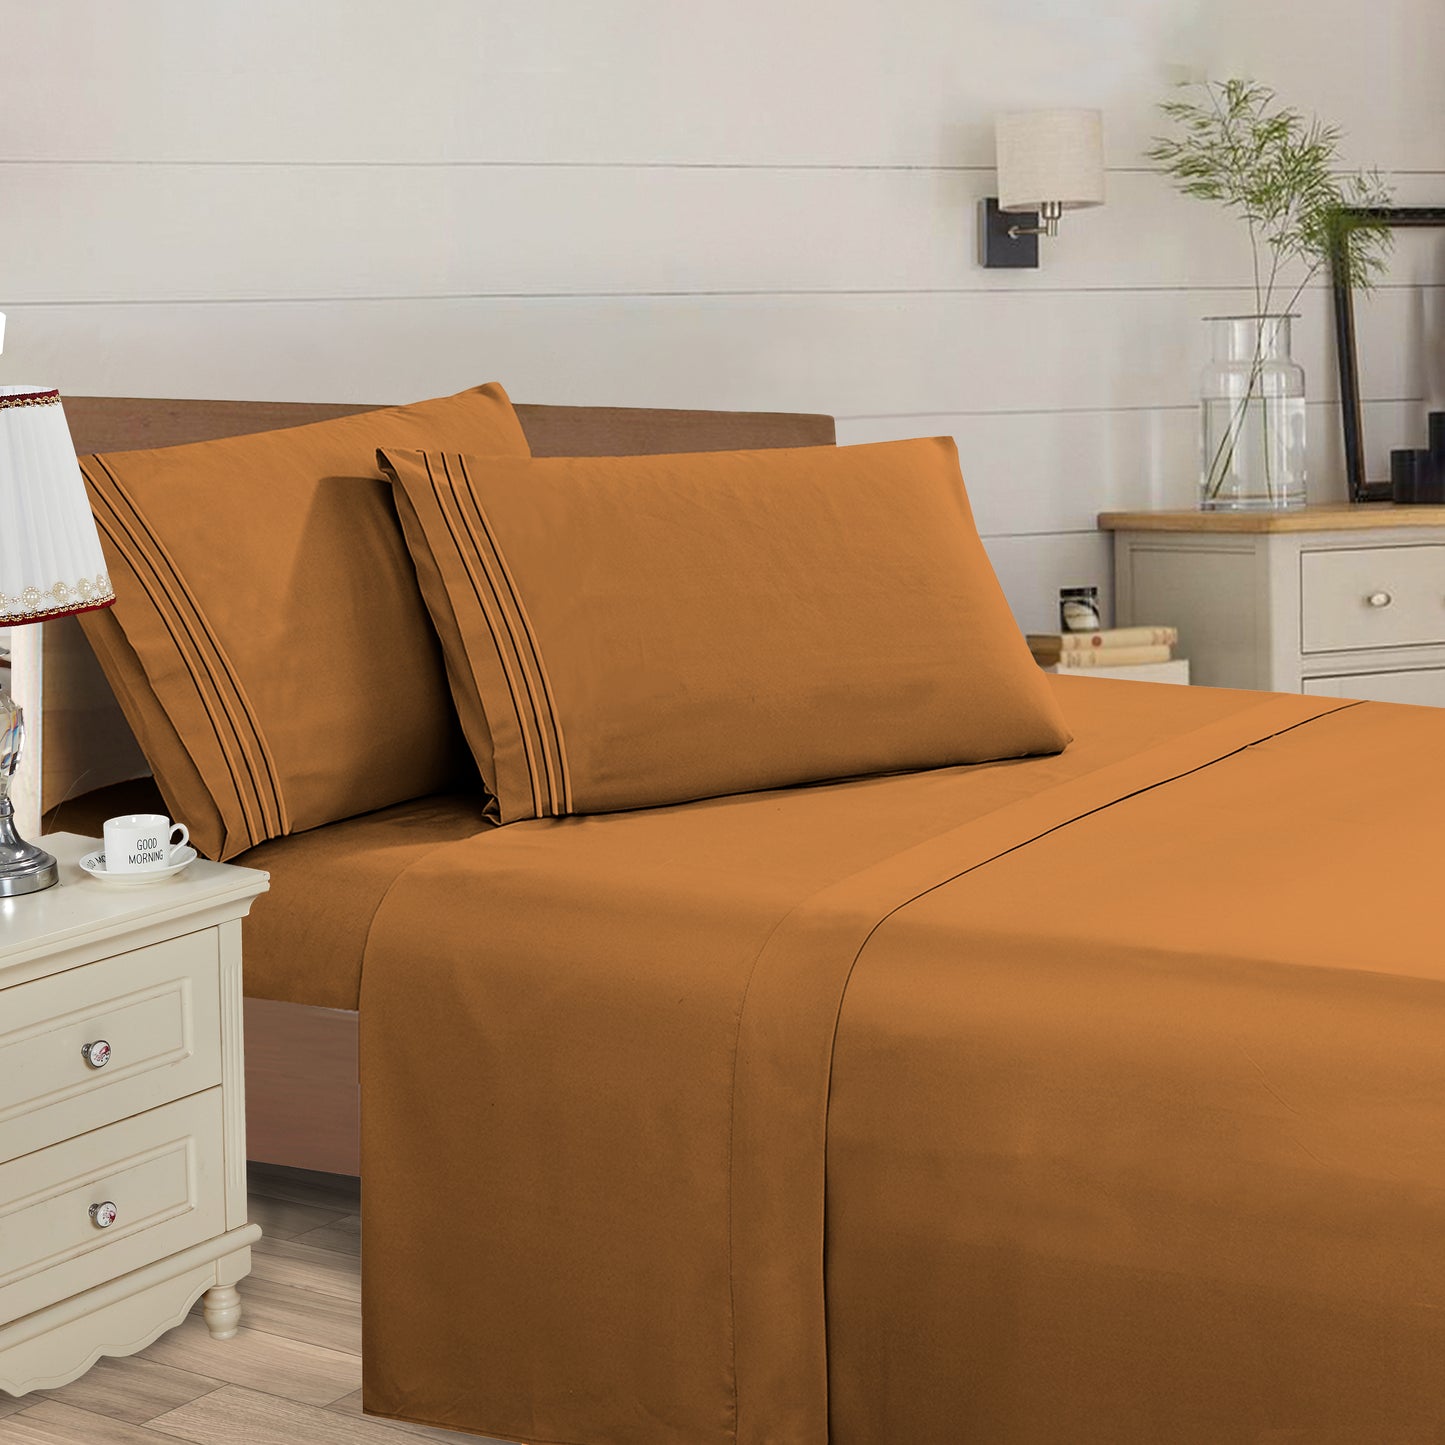 Elegant Comfort Essential 4-Piece 3-Line Embroidery Sheet Set, Soft as a Hotel Premium Quality,  Moody Shades